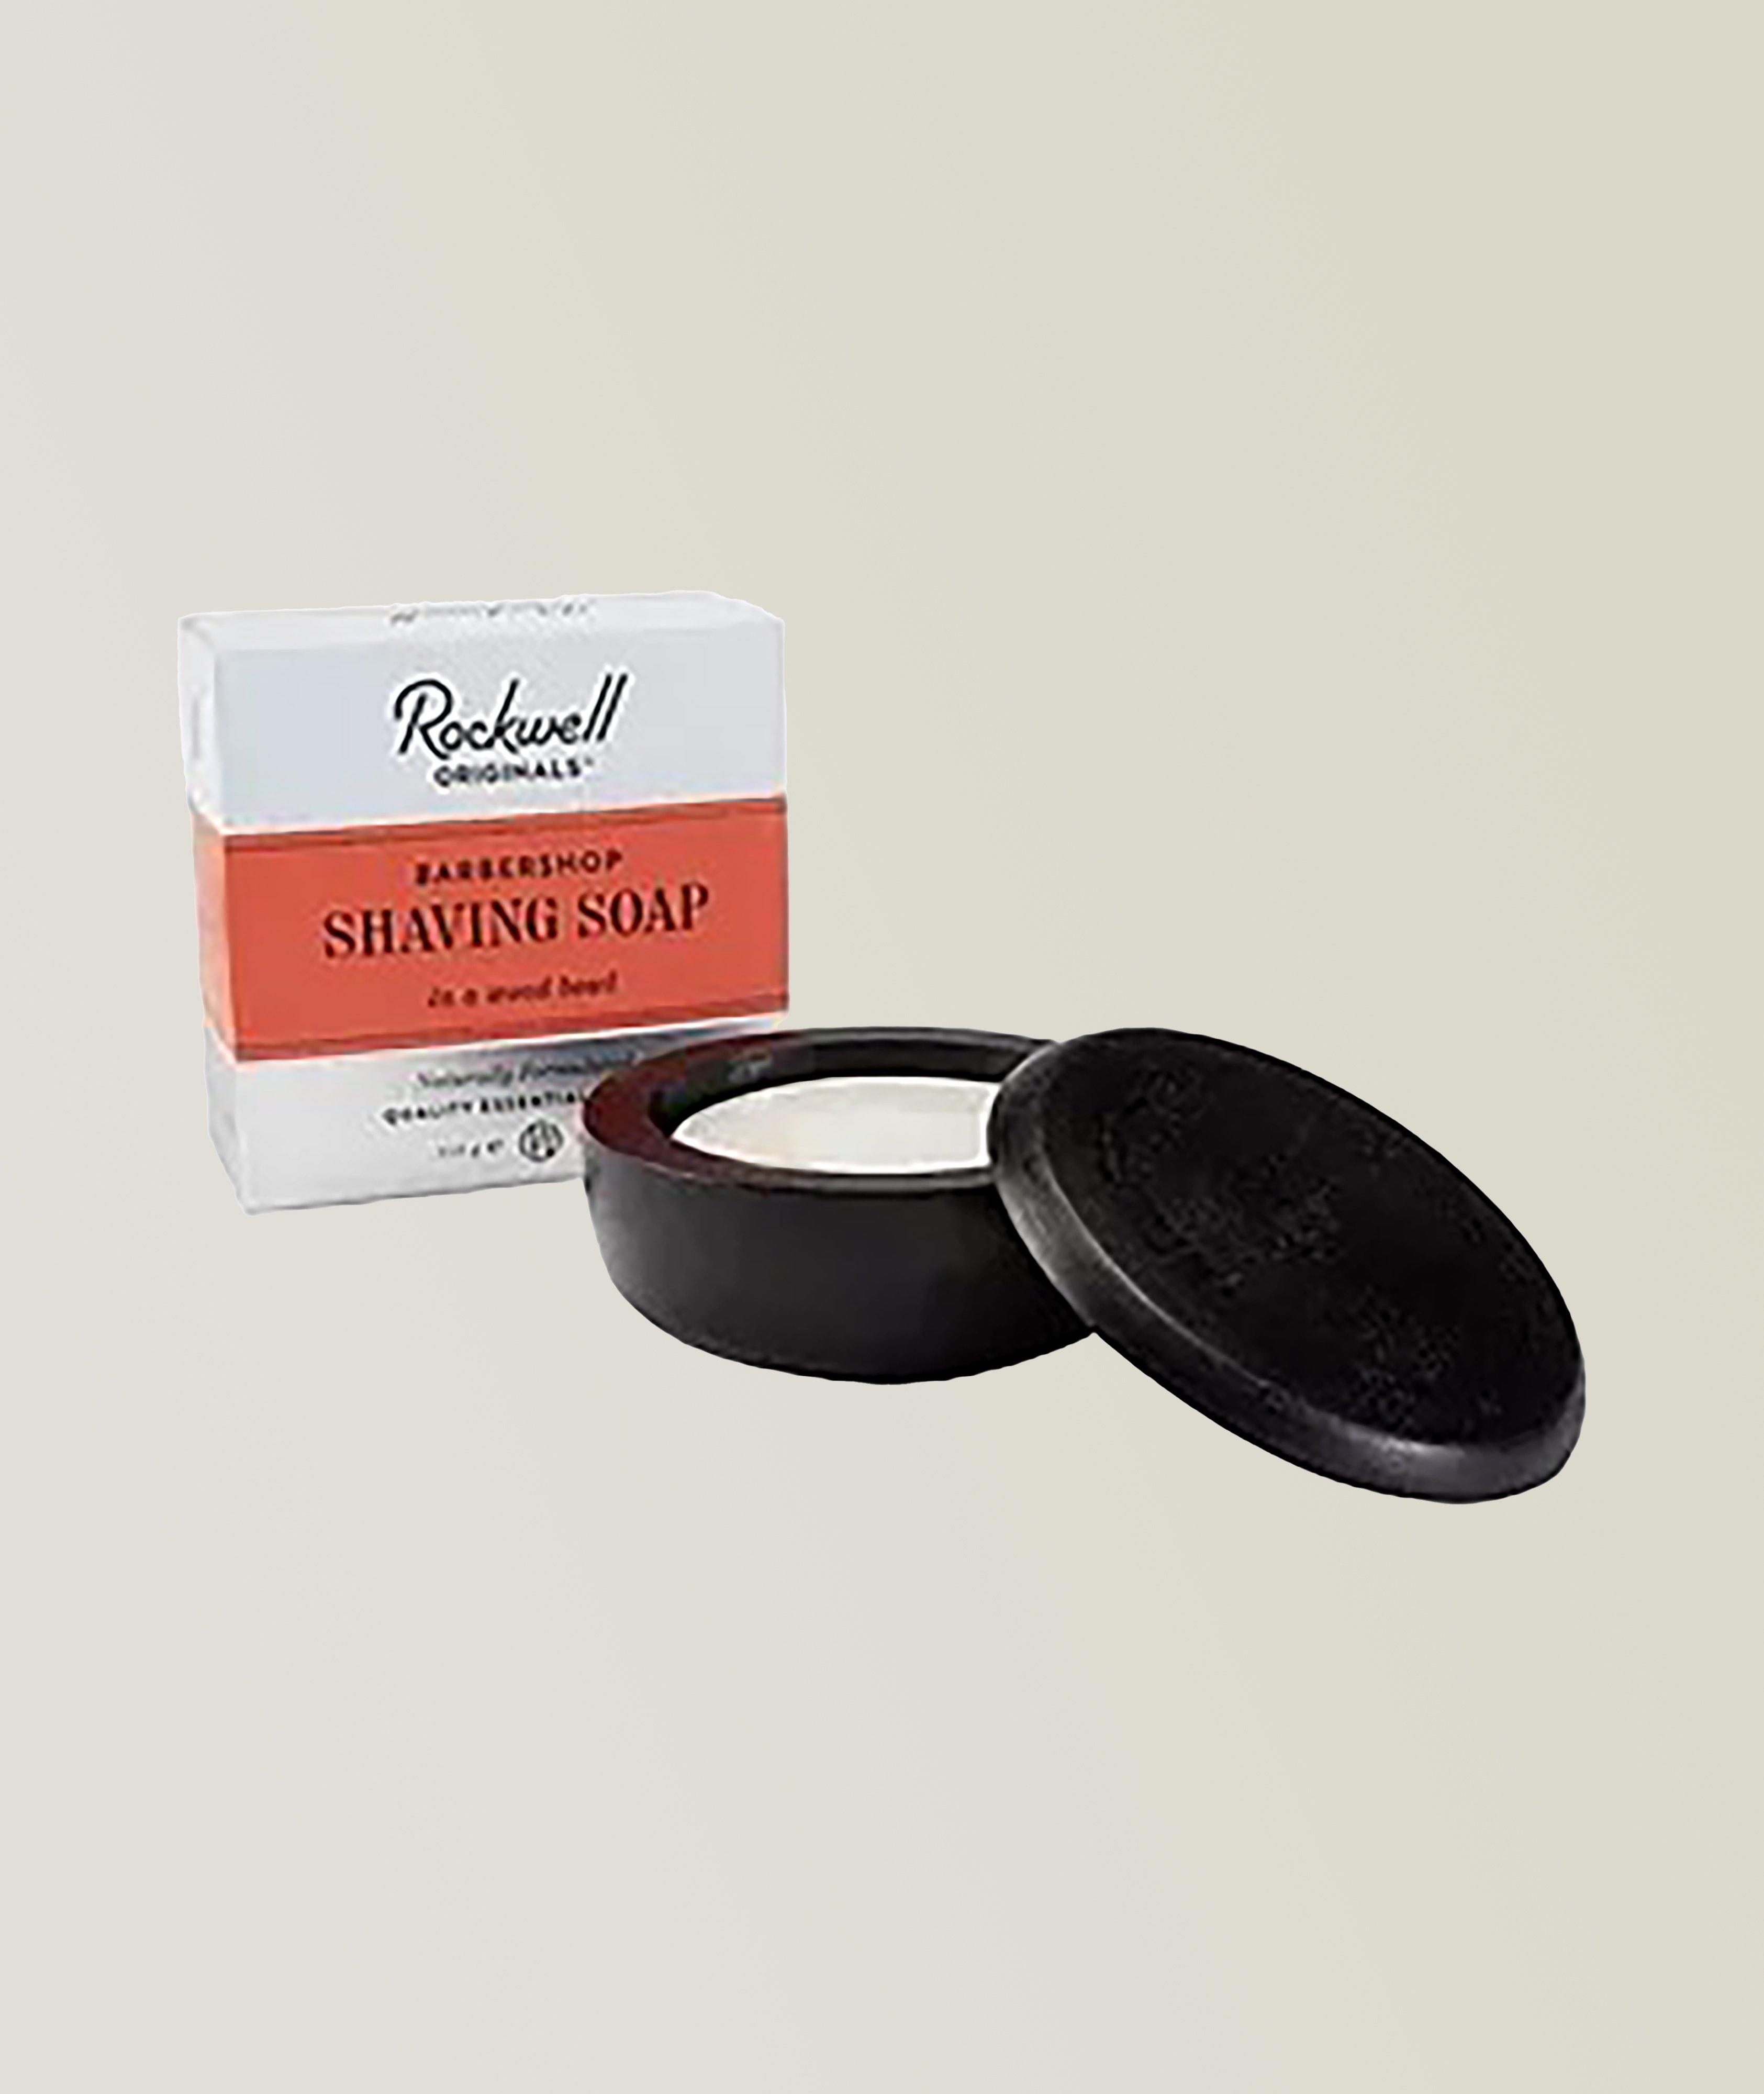 Rockwell Shave Soap in a wooden Bowl - Barbershop Scent image 0